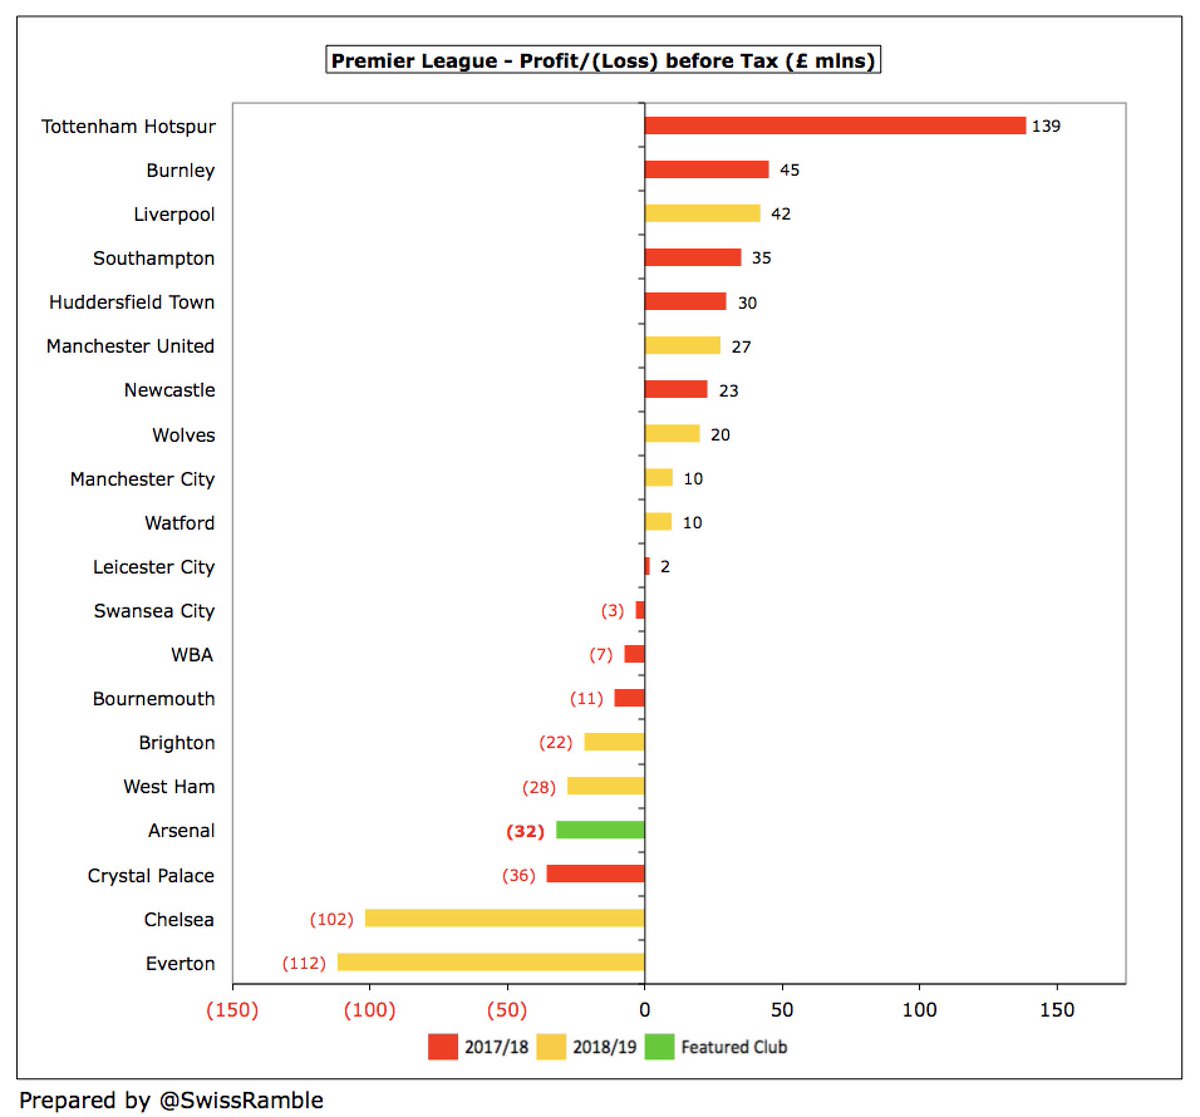  #AFC £32m loss before tax is obviously not great, though to place this into perspective it is much better than  #EFC and  #CFC, who both reported deficits above £100m. That said, other clubs have posted good profits in 2018/19, especially  #LFC £42m and  #MUFC £27m.